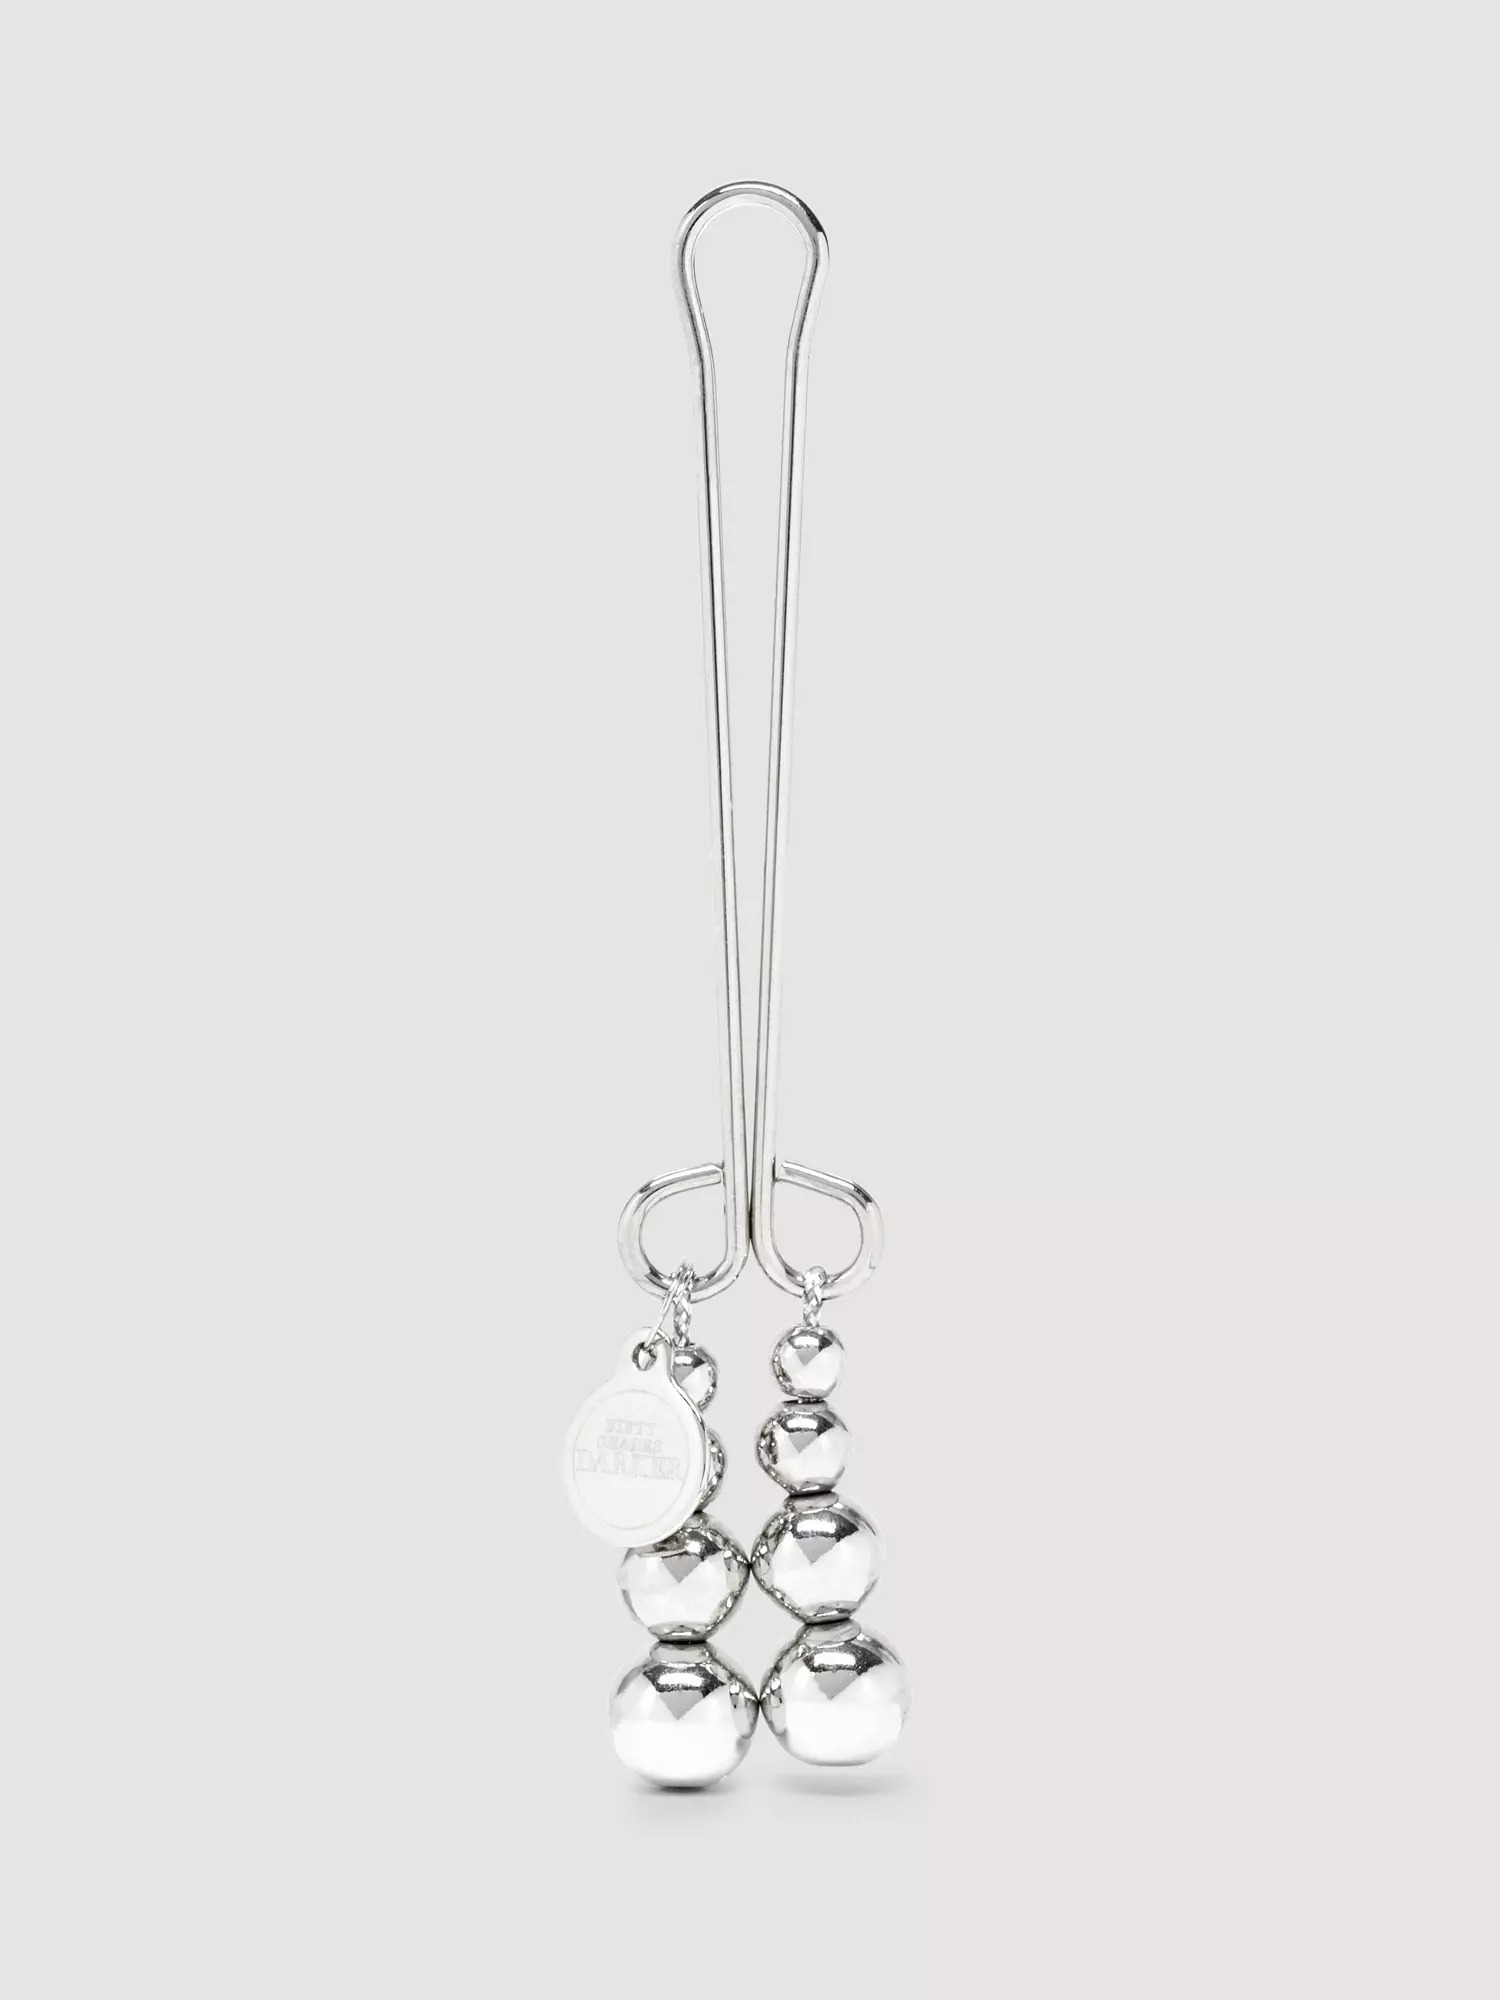 Fifty Shades Darker Just Sensation Beaded Clitoral Clamp. Slide 2